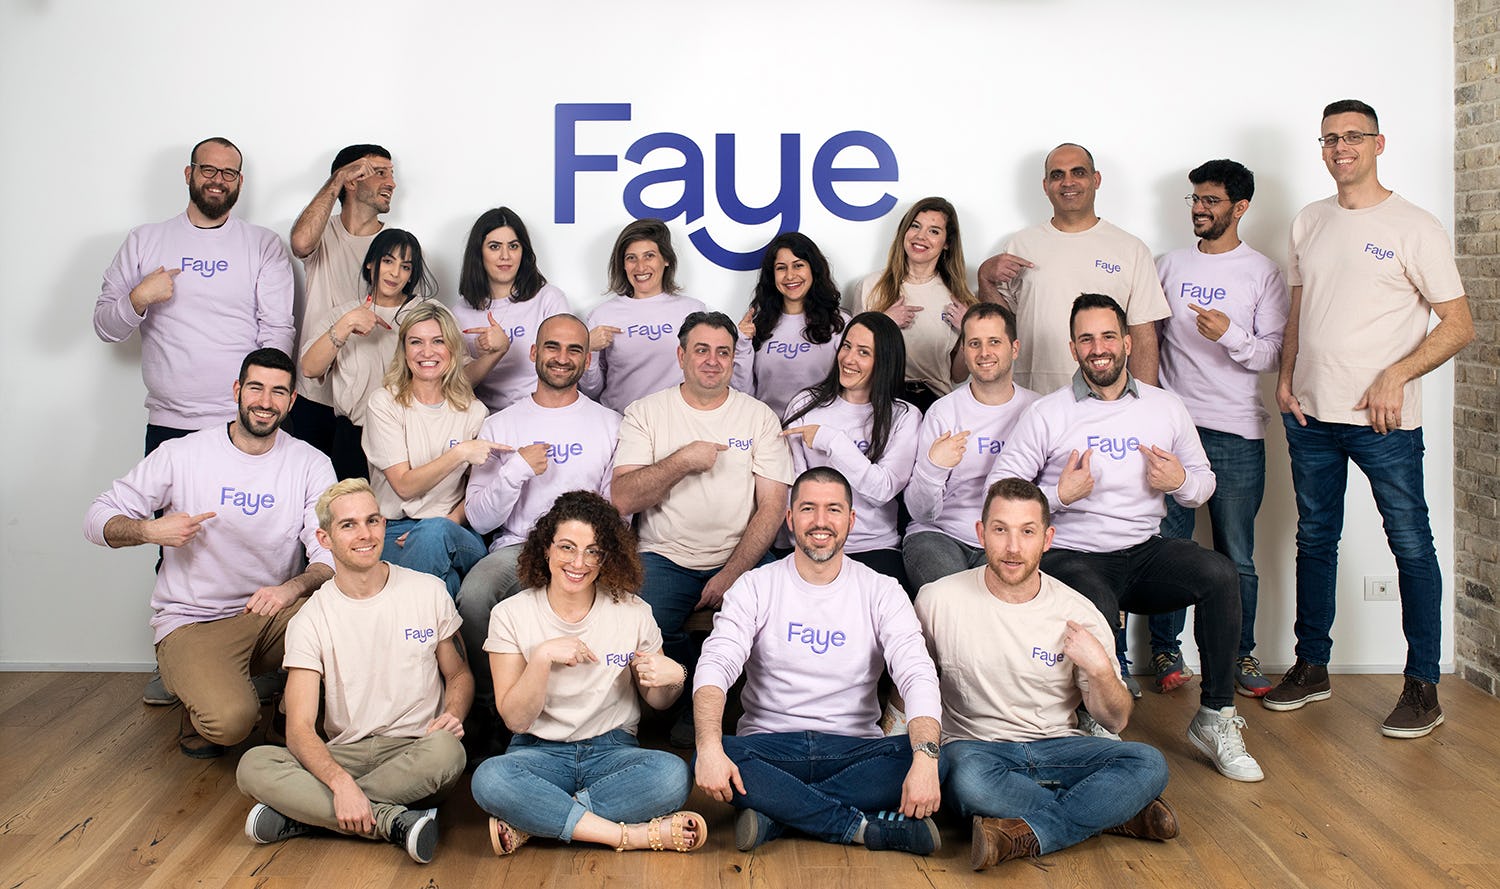 Faye team wearing Faye shirts and sweatshirts in front of the Faye sign